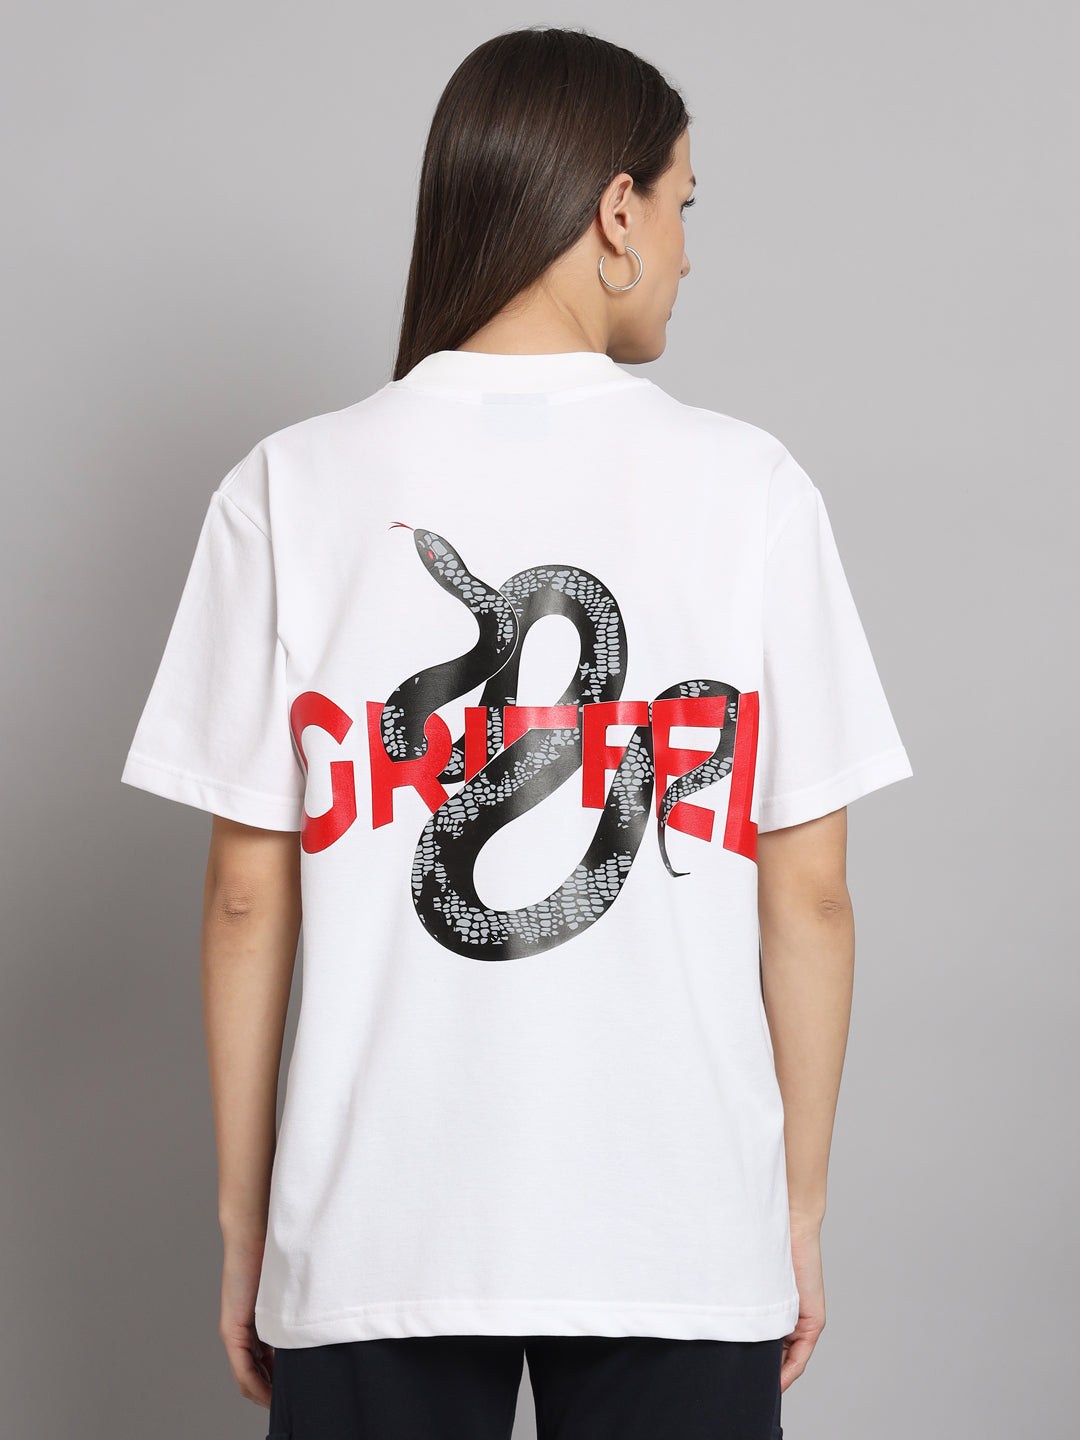 GRIFFEL Women REFLECTIVE SNAKE Printed Loose fit White T-shirt - griffel